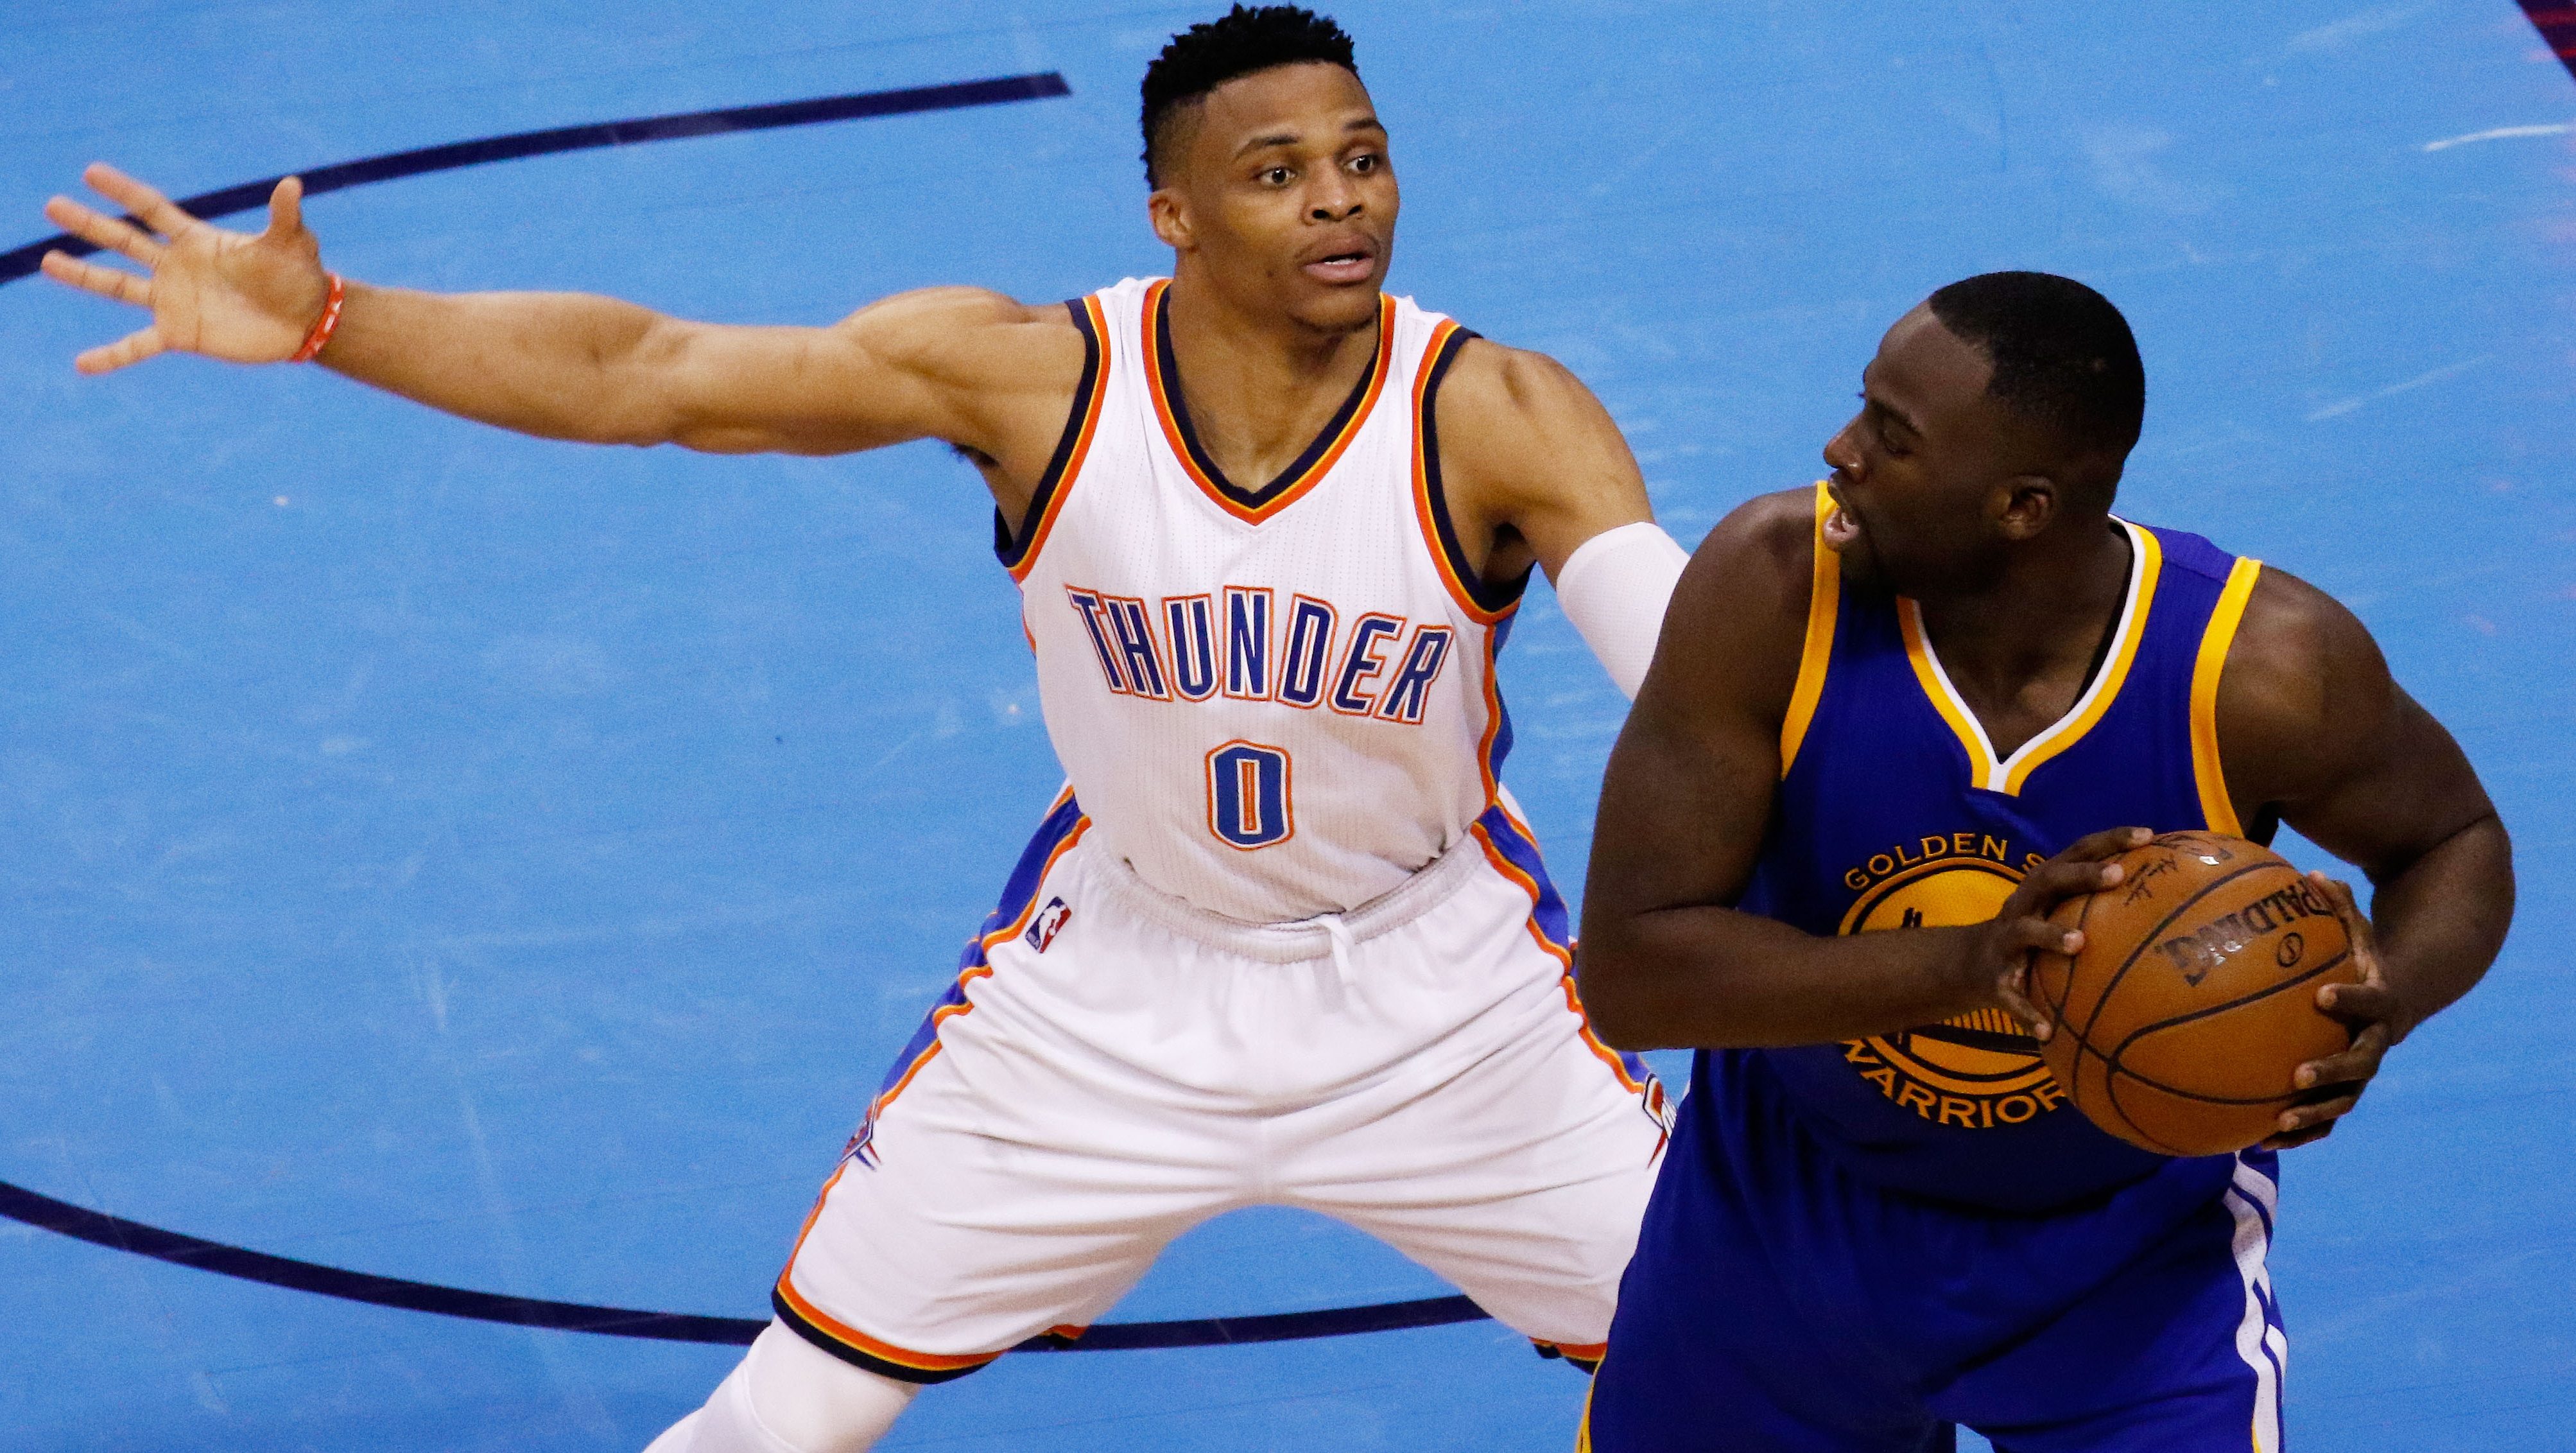 Thunder vs Warriors Live Stream How to Watch Game 5 Free 